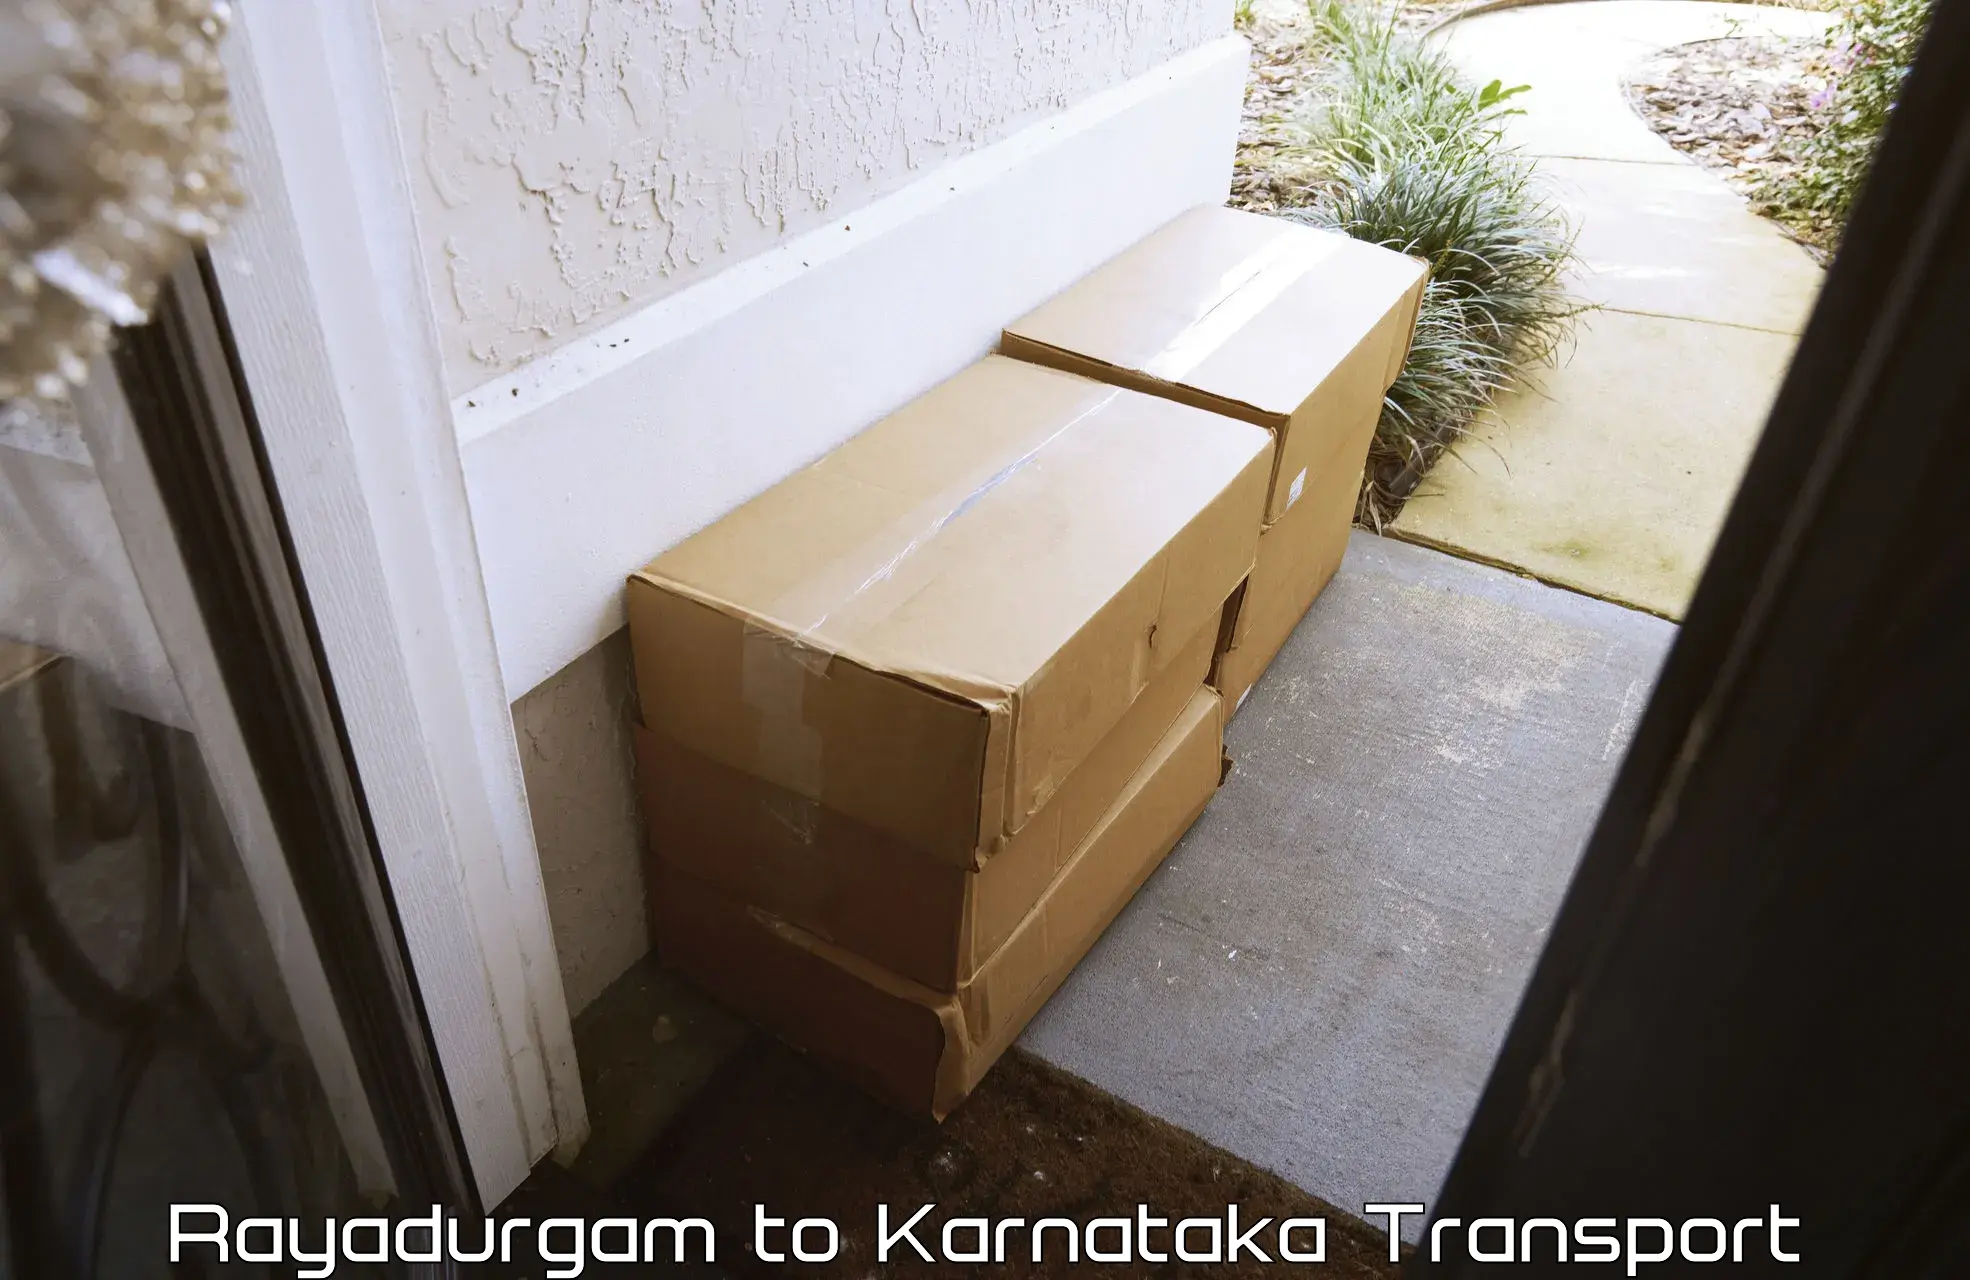 Air freight transport services Rayadurgam to Kollegal